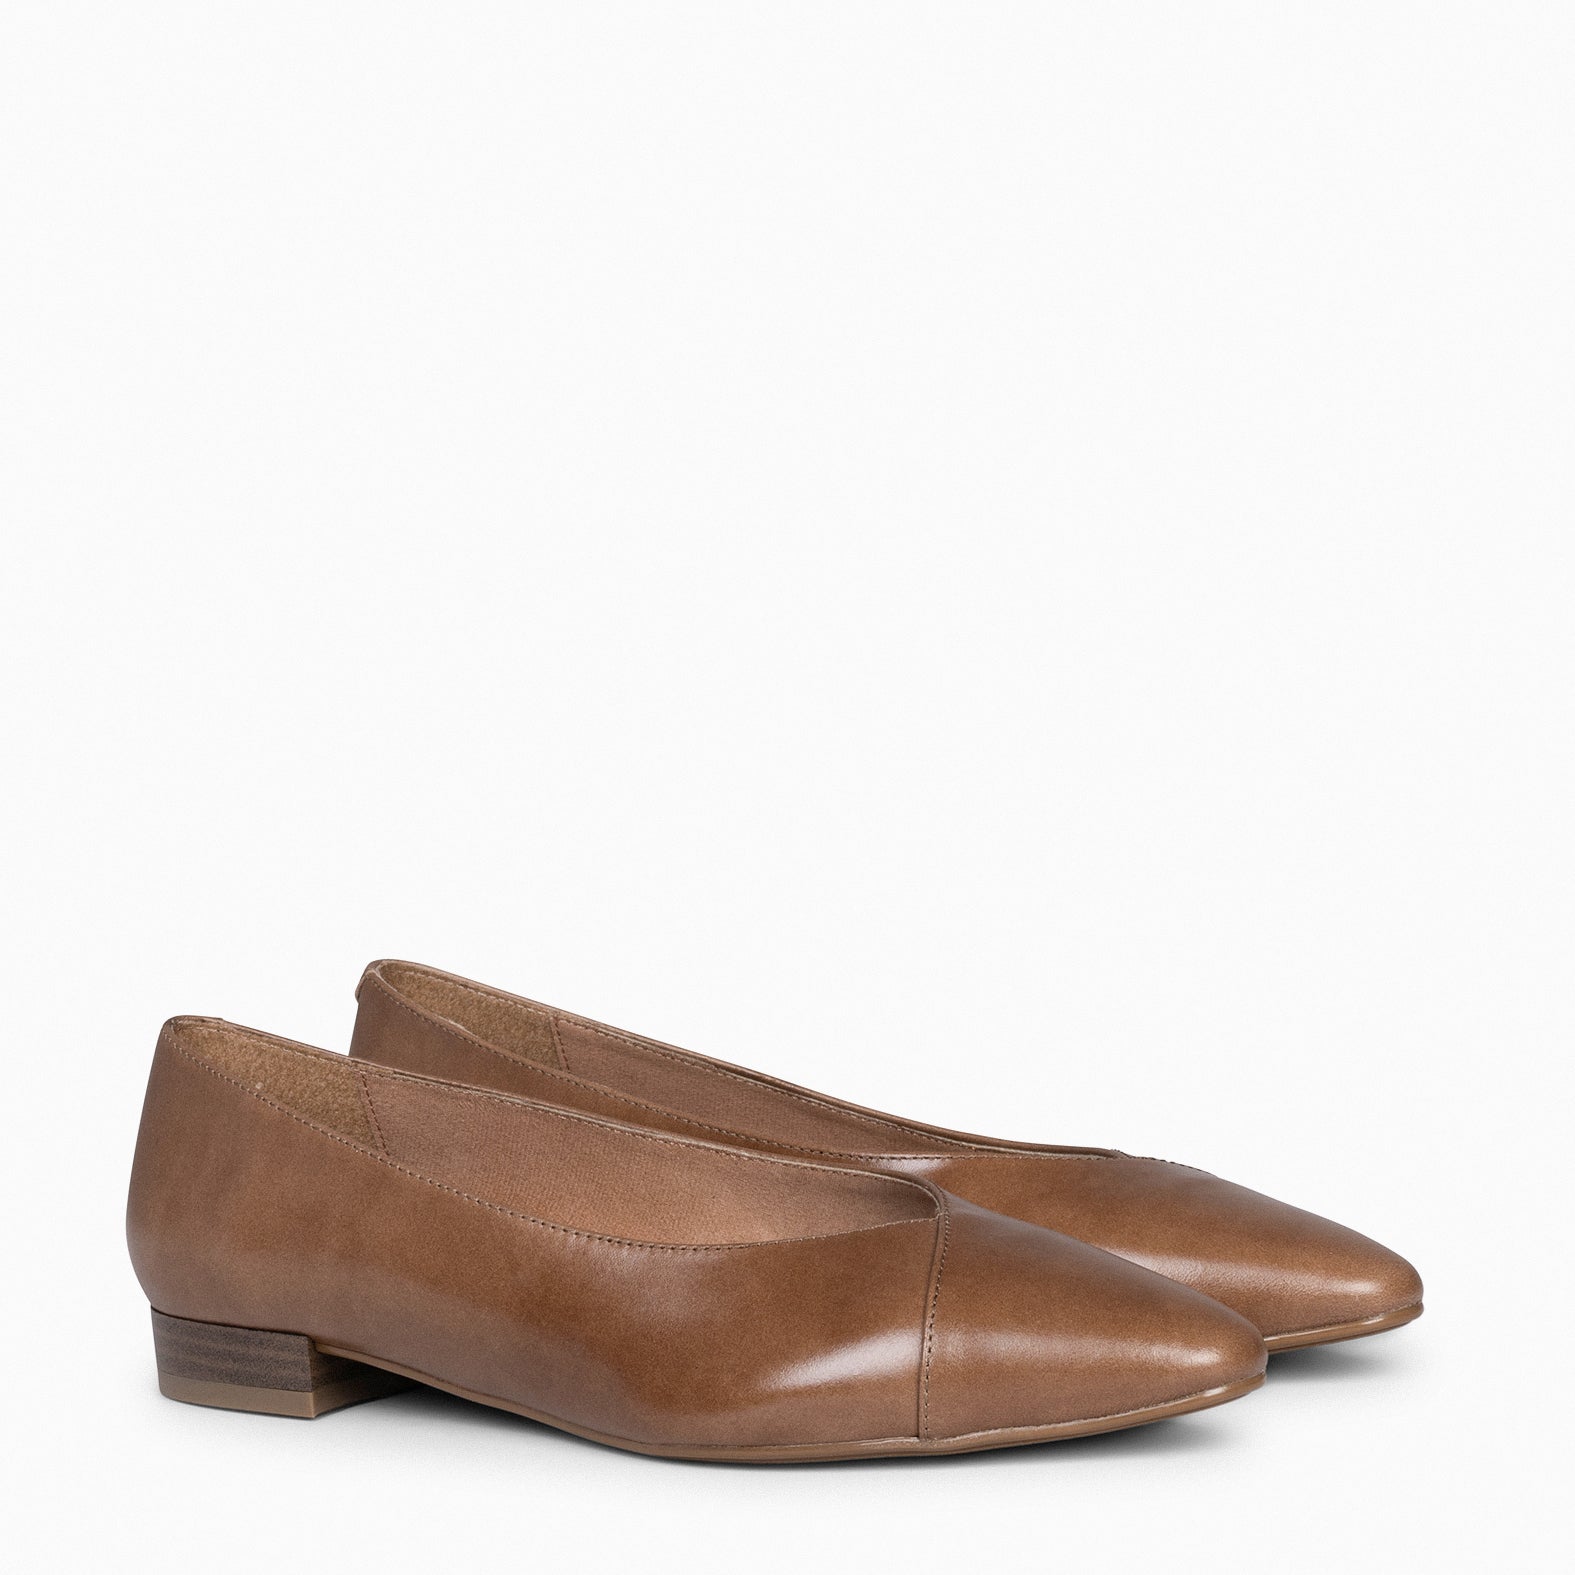 MARIE – TAUPE Pointed toe flats 